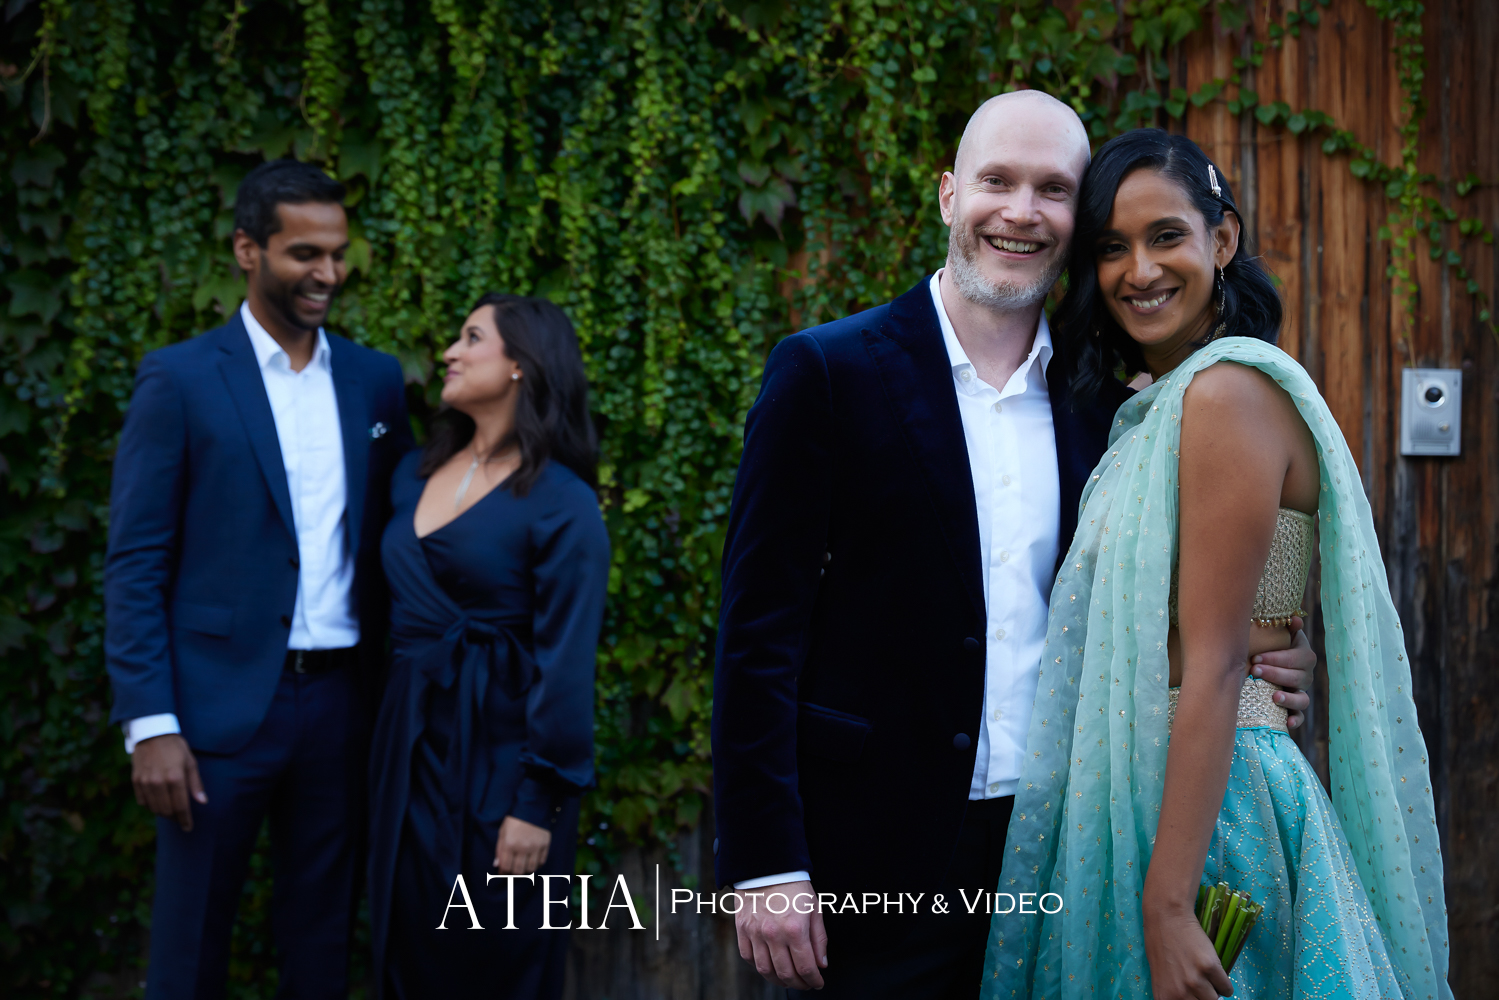 , Shiv and Jono&#8217;s wedding at St Andrews Conservatory captured by ATEIA Photography &#038; Video